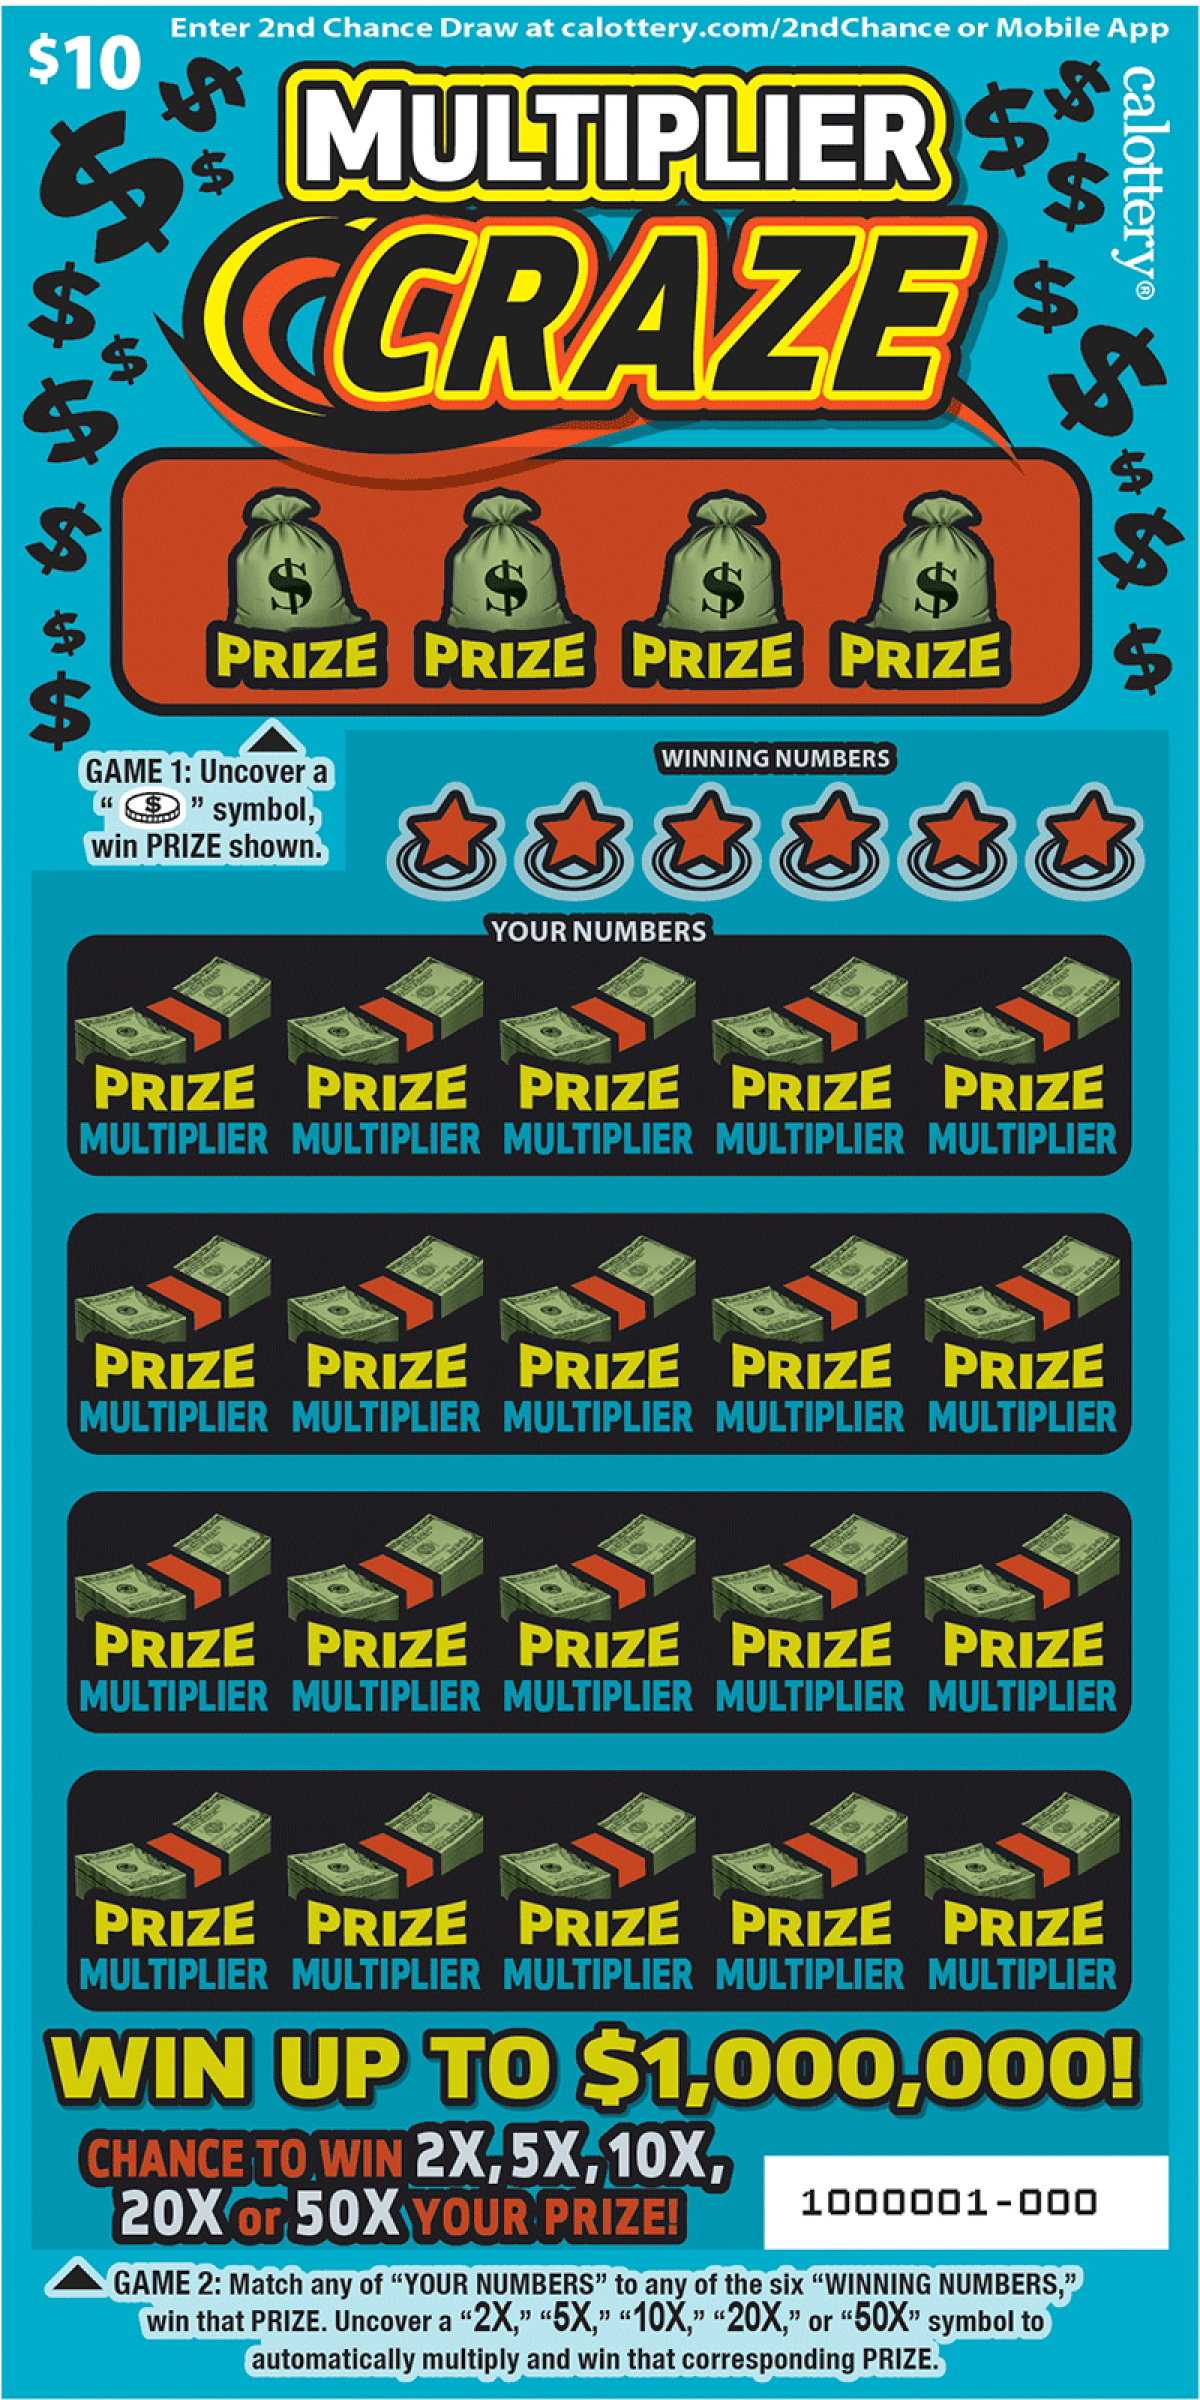 The Calfornia Lottery's Multiplier Craze scratch-off ticket offers up to a $1 million jackpot.